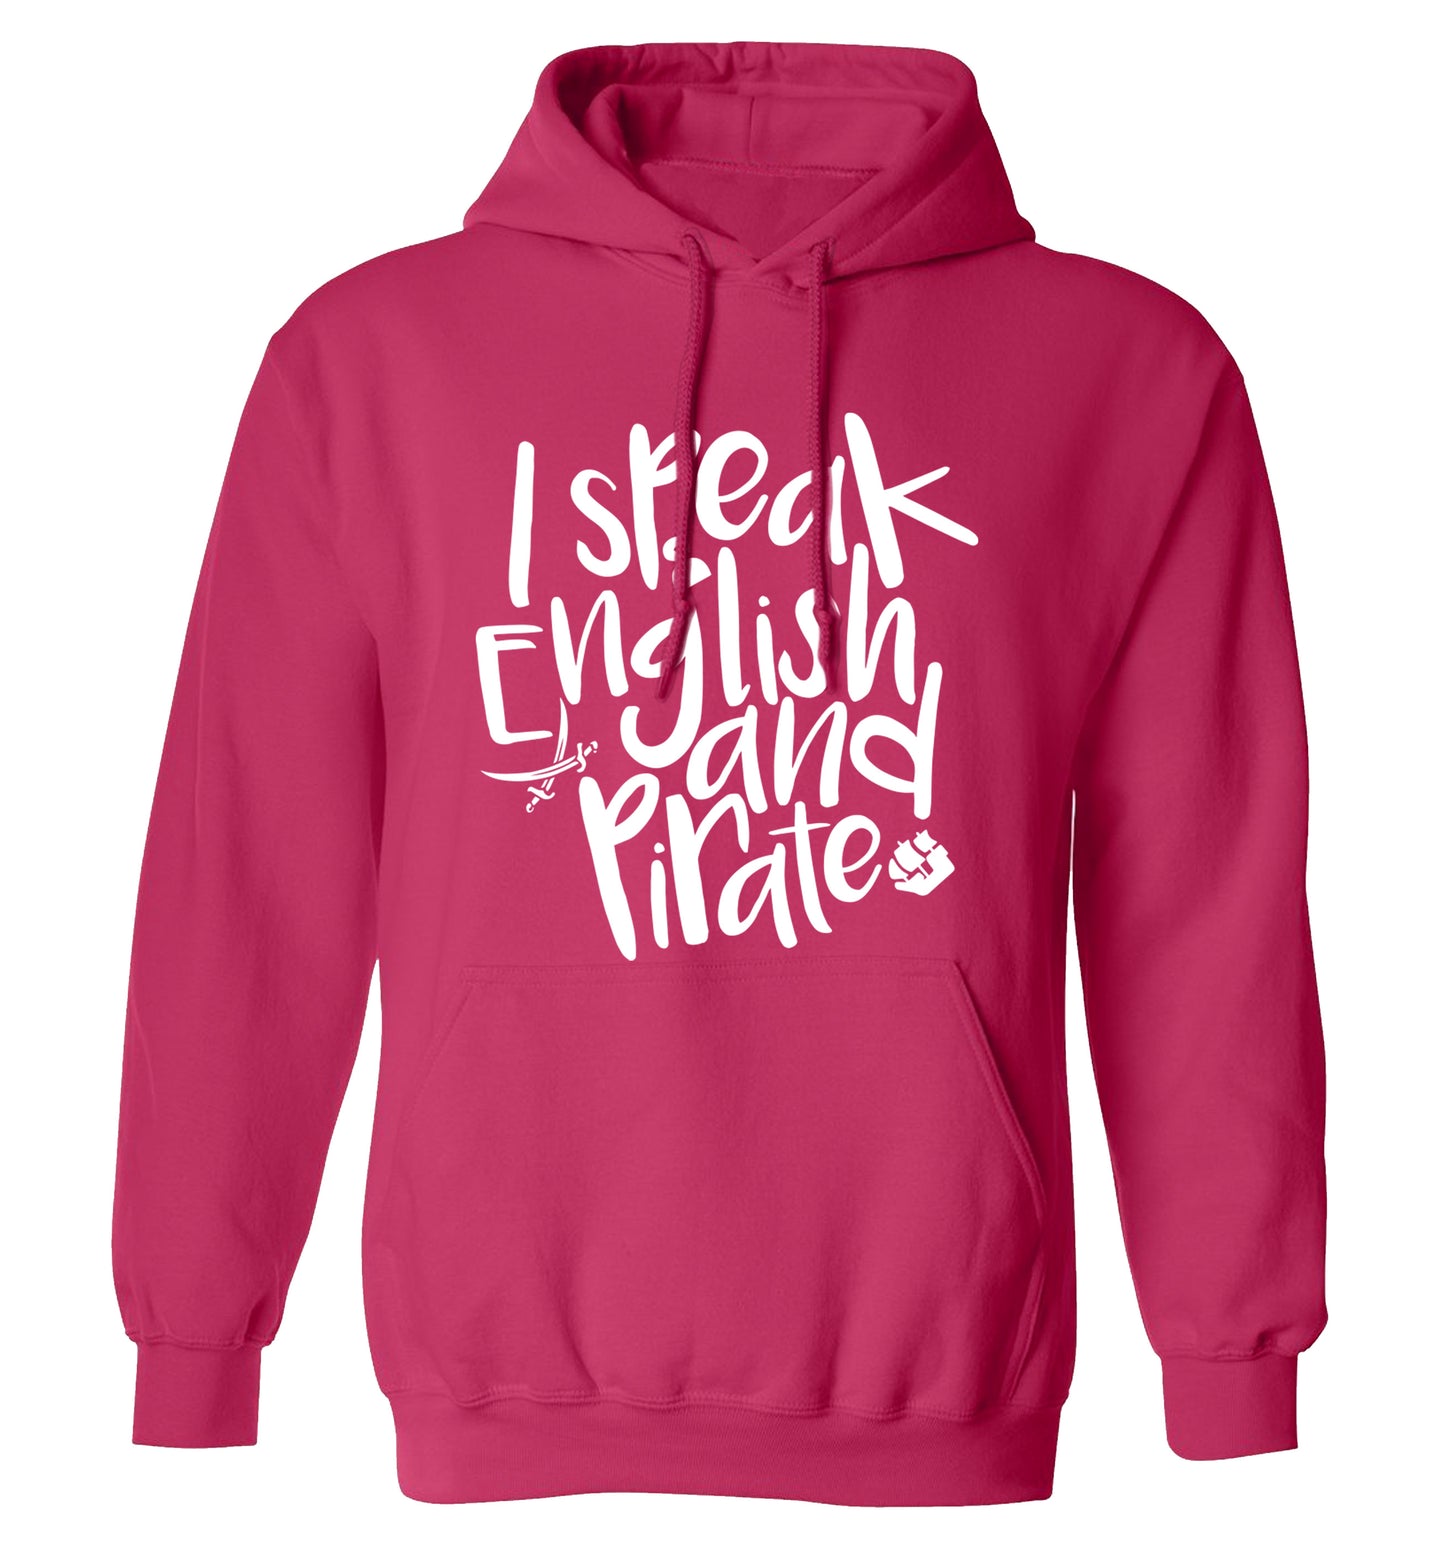 I speak English and pirate adults unisex pink hoodie 2XL